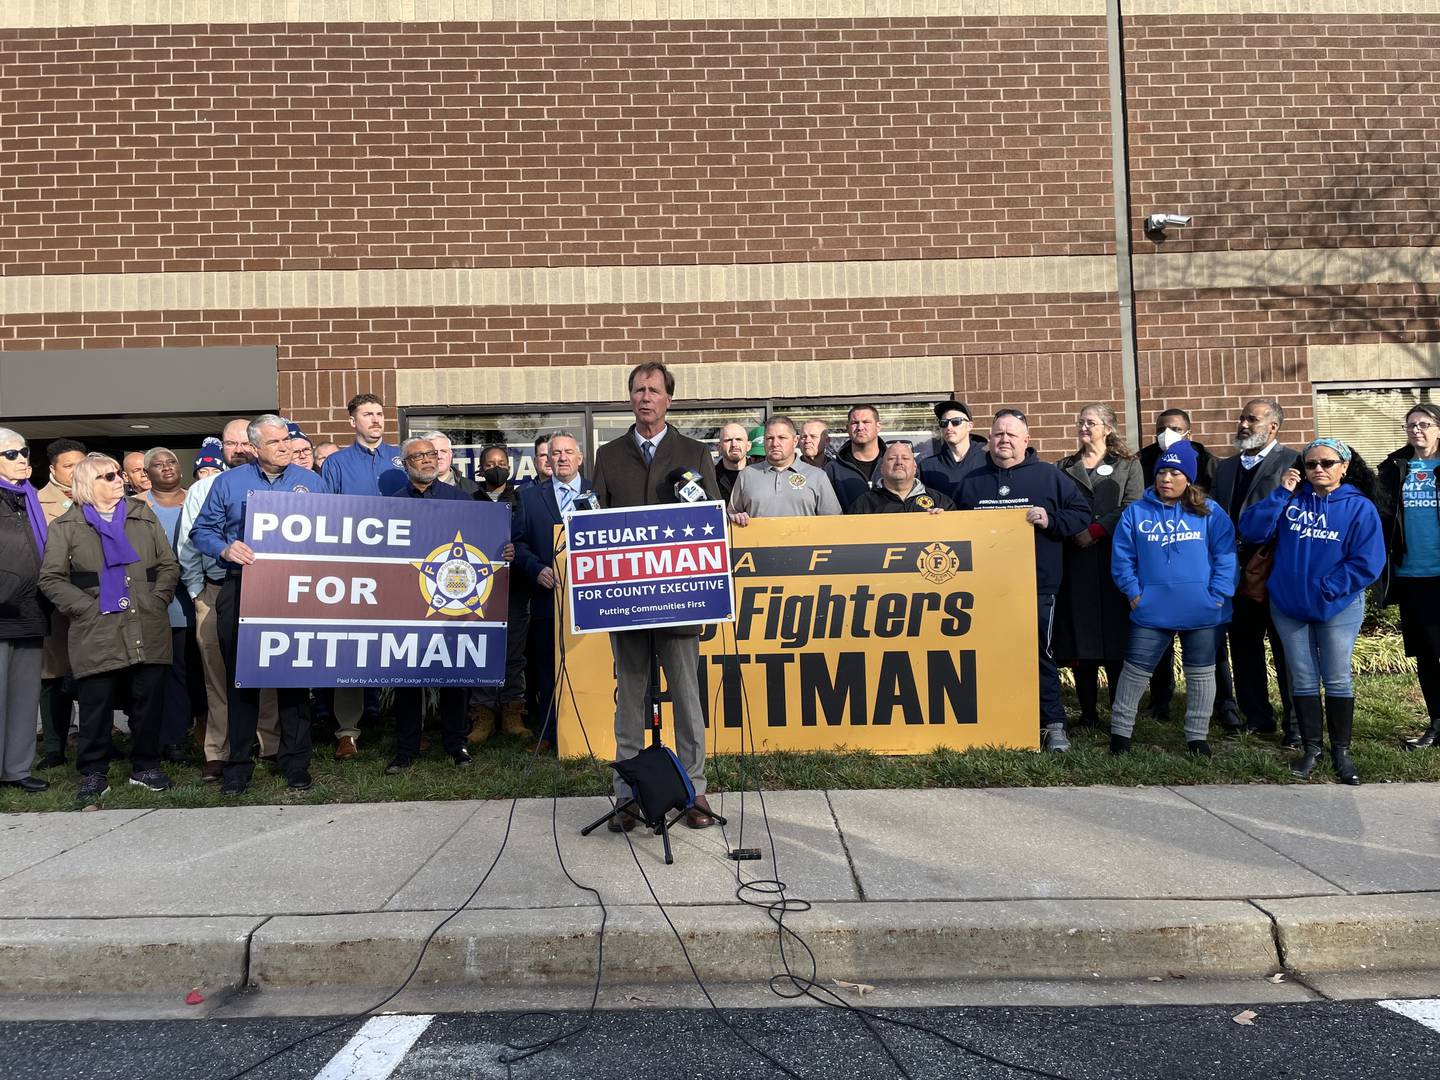 Anne Arundel County Executive Steuart Pittman stands at a lectern speaking. Behind him are supporters from police and fire fighter unions.